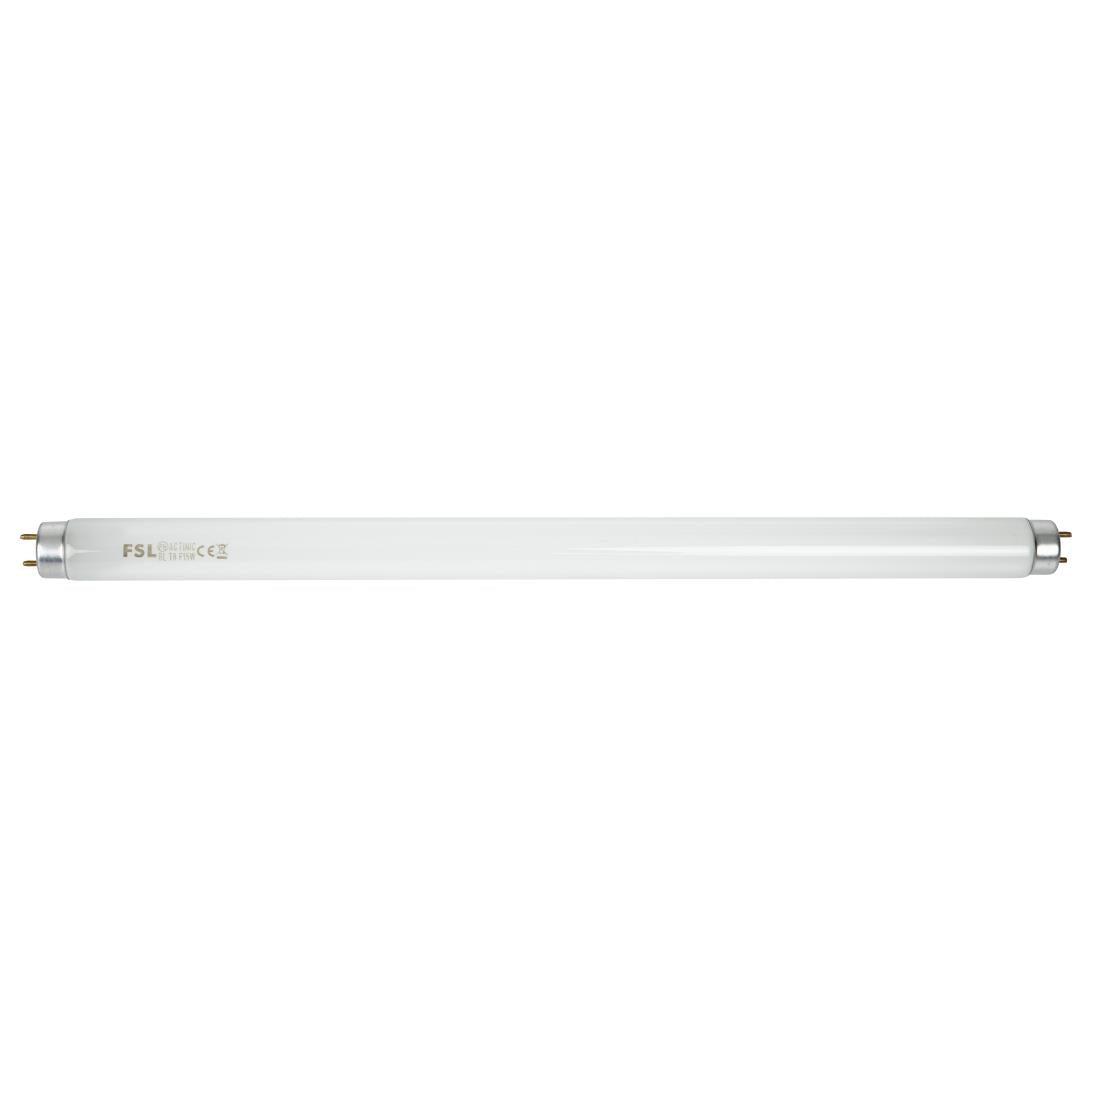 P149 Replacement 15W Fluorescent Tube for Eazyzap Fly Killers